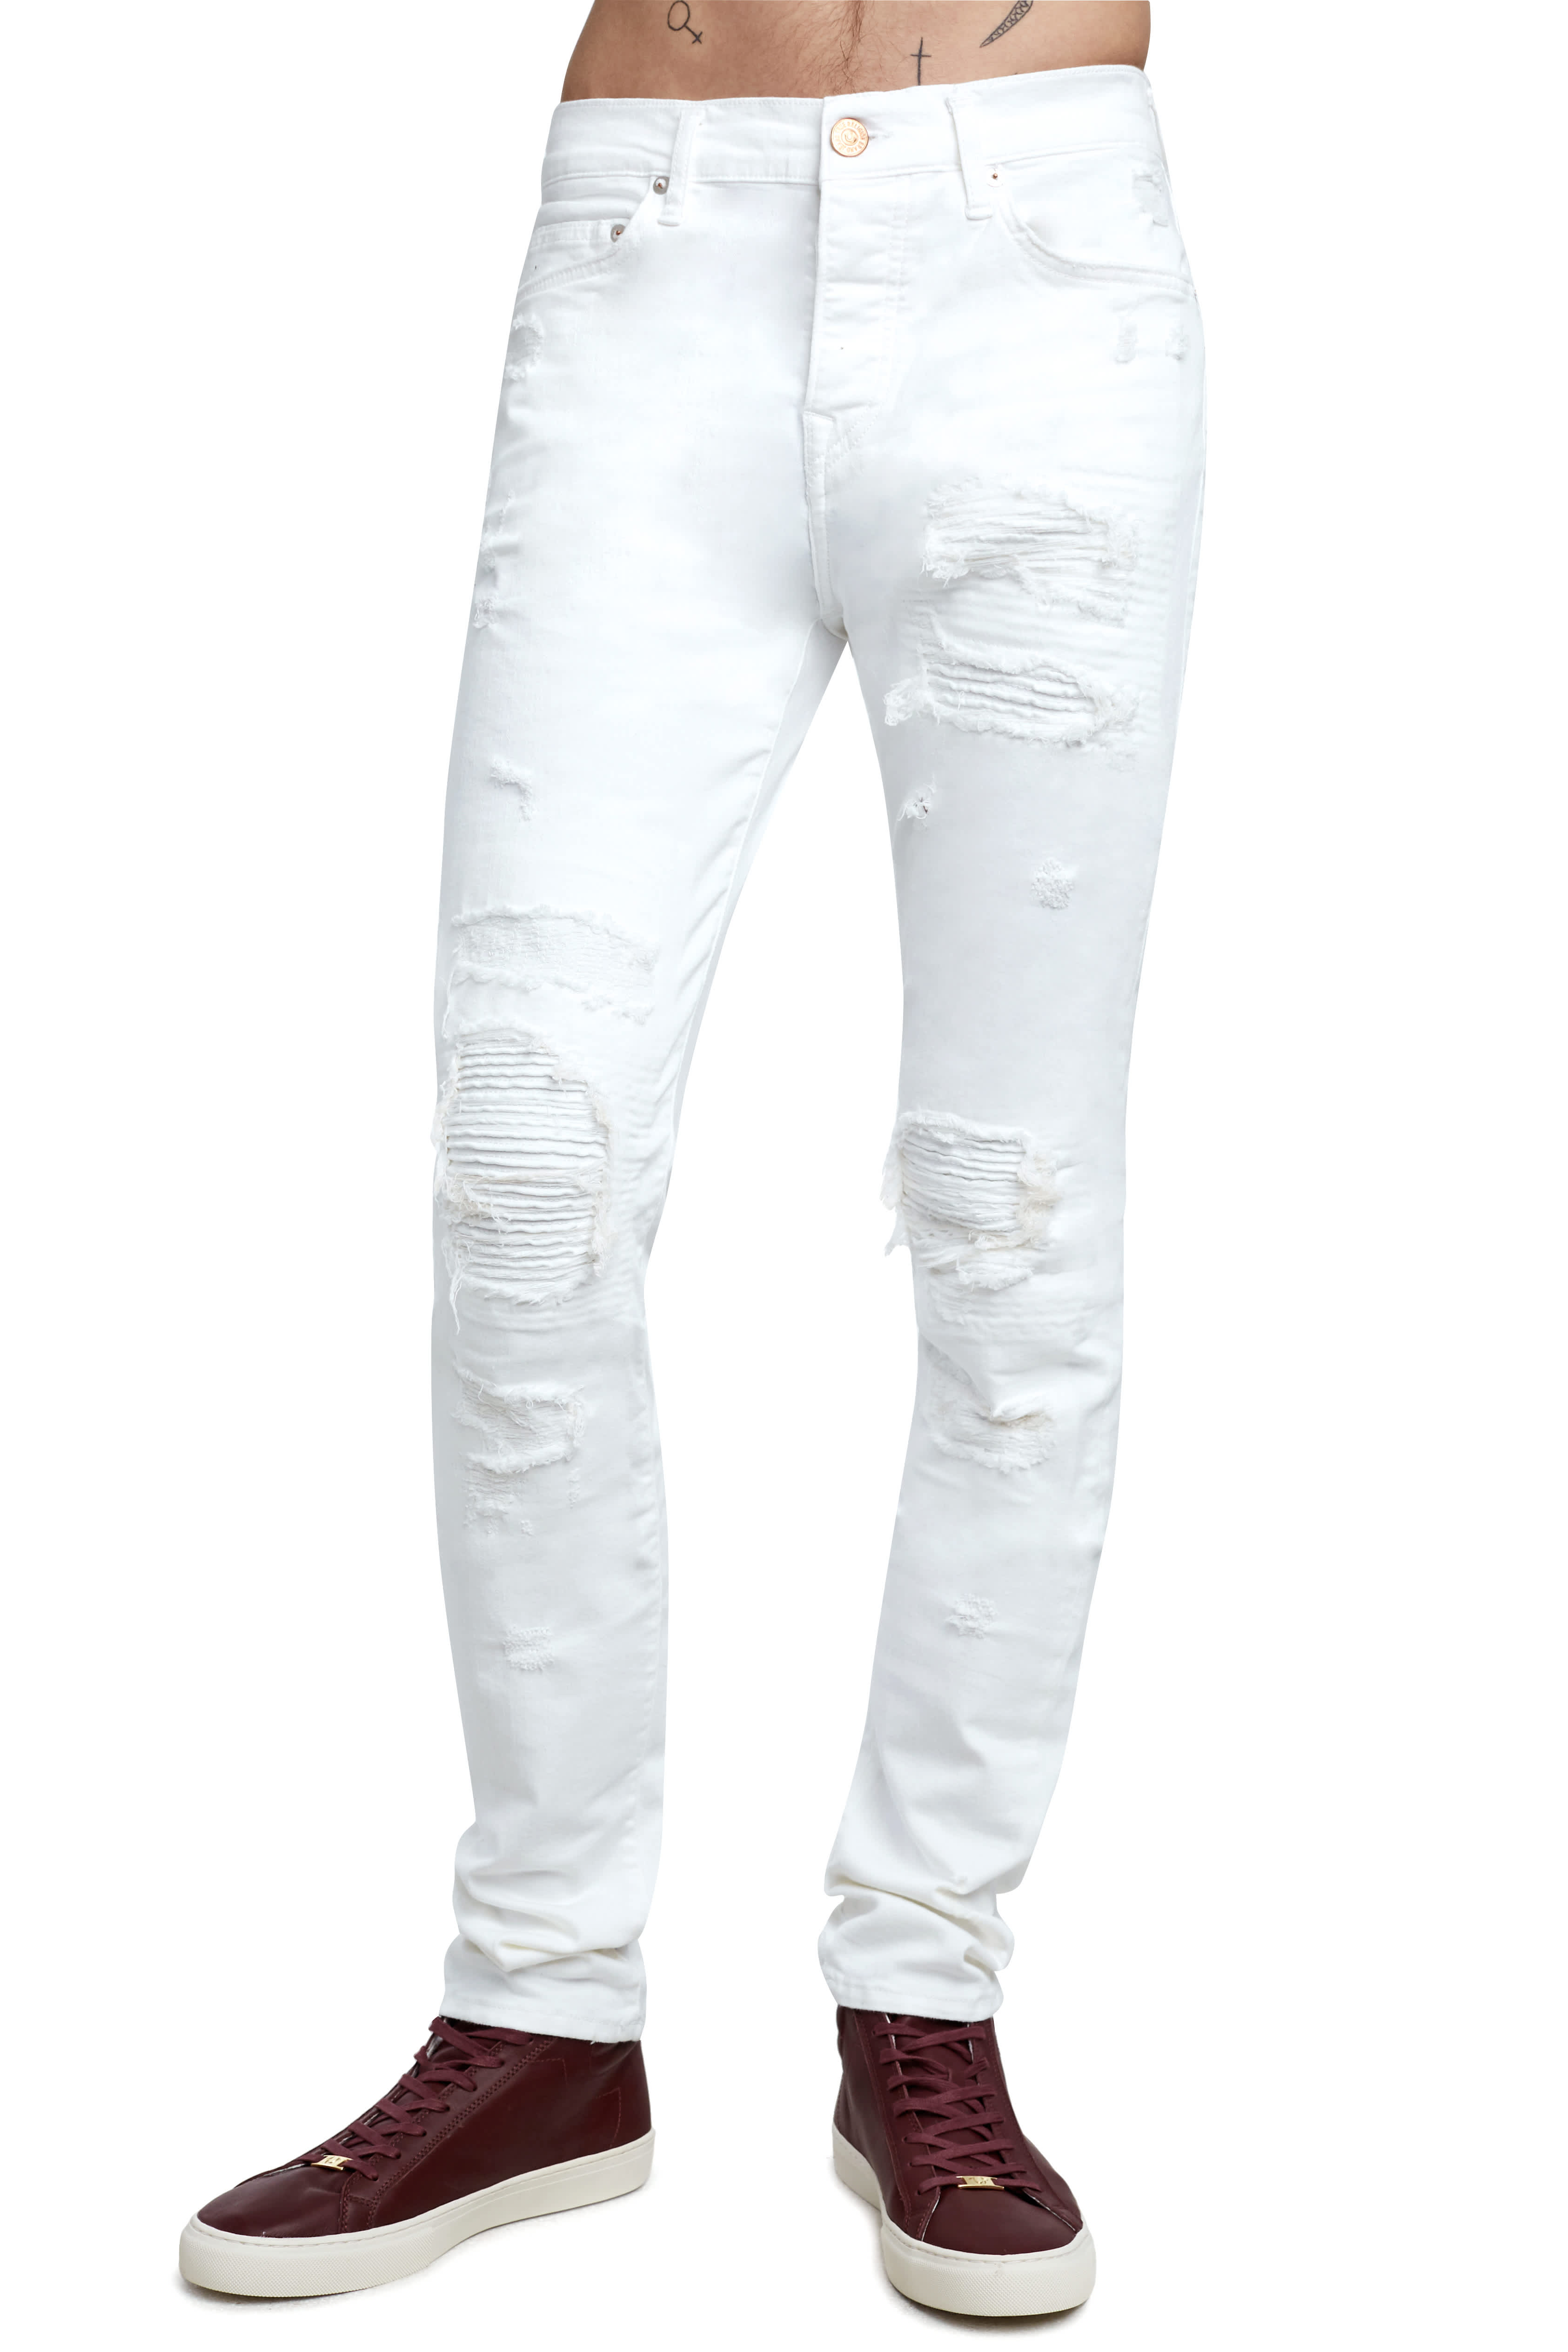 ROCCO DESTROYED SKINNY MENS JEAN